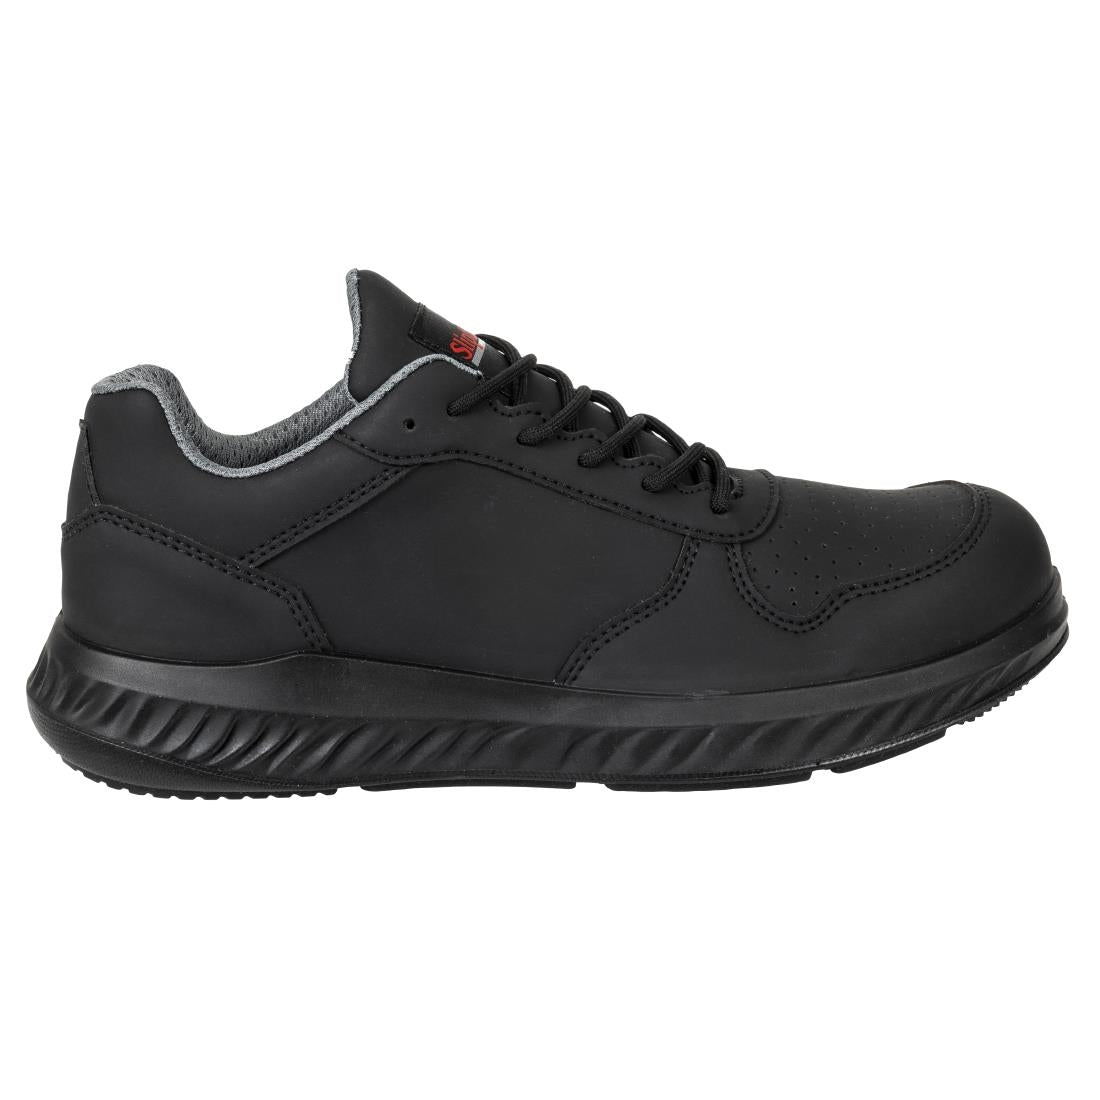 BA063-40 Slipbuster Recycled Microfibre Trainers Matte Black 40 JD Catering Equipment Solutions Ltd